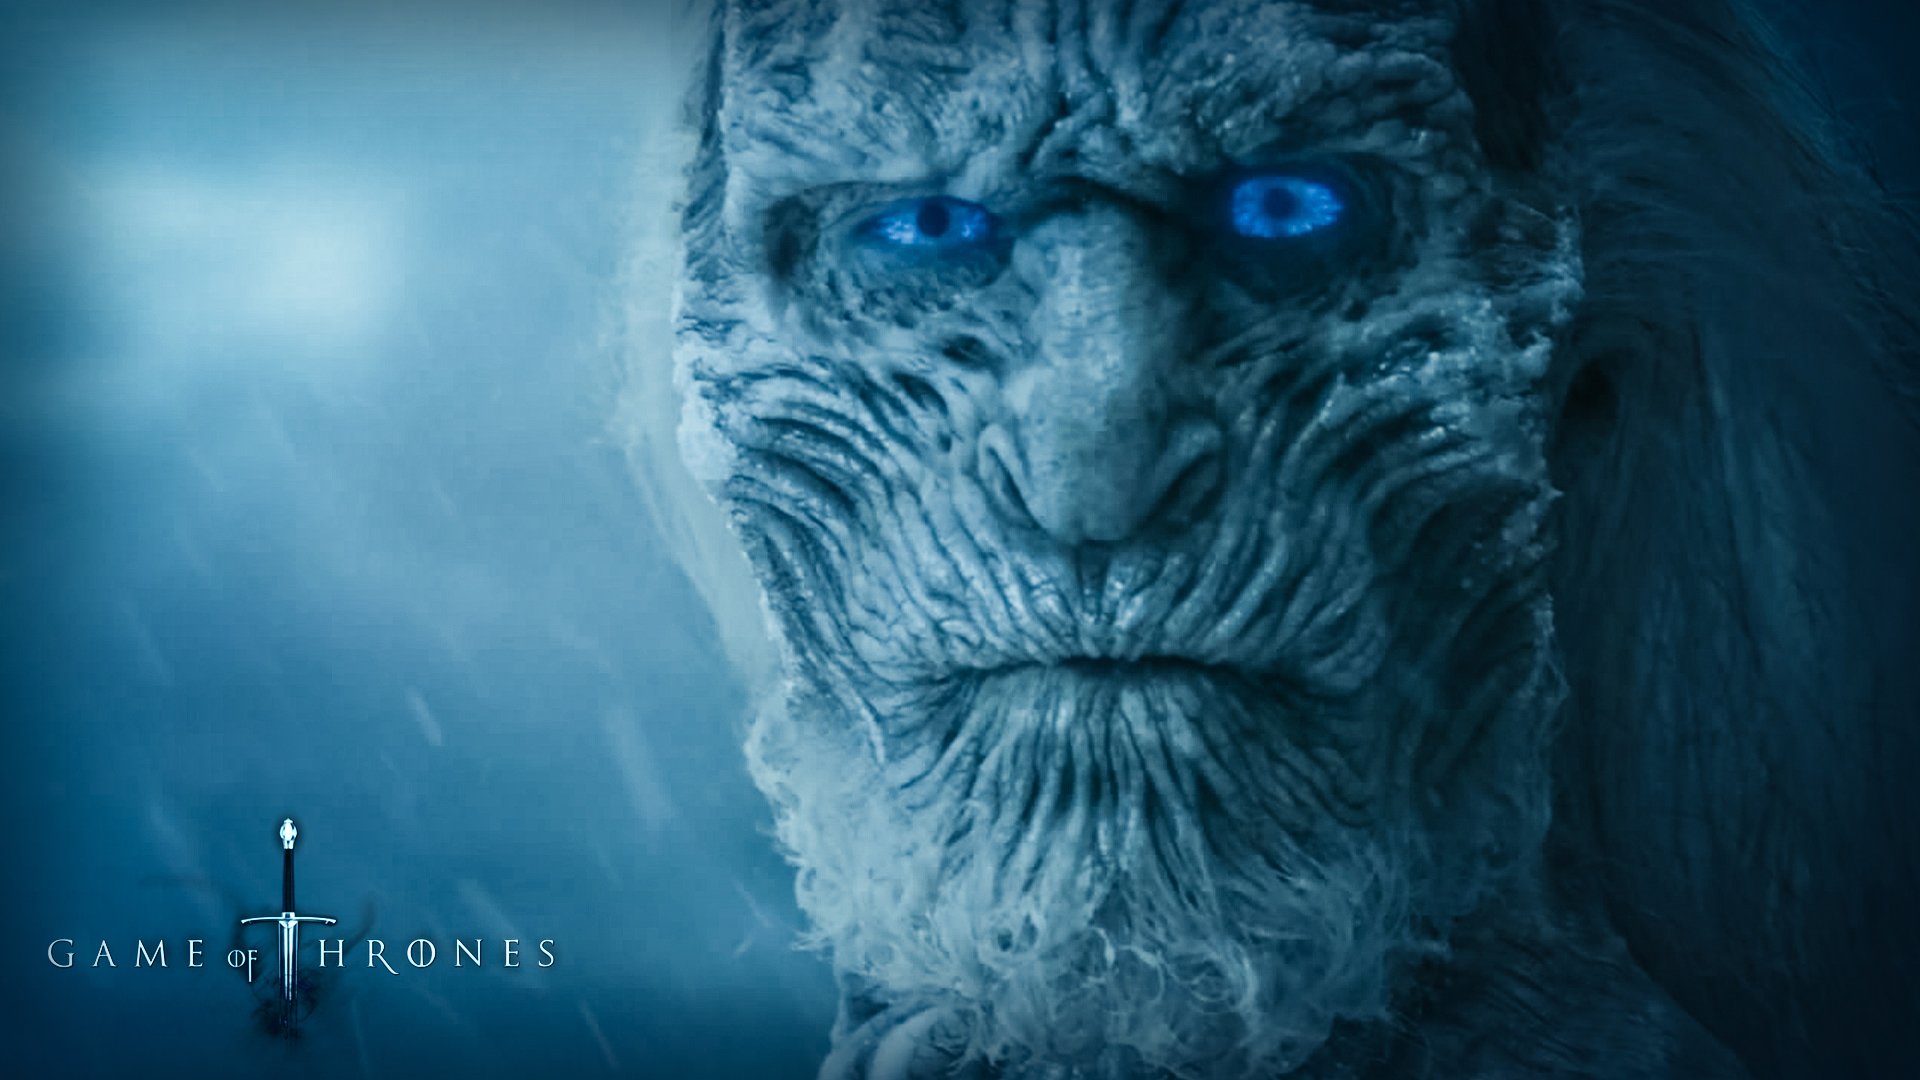 Some Awesome Game Of Thrones Wallpaper 1920x1080